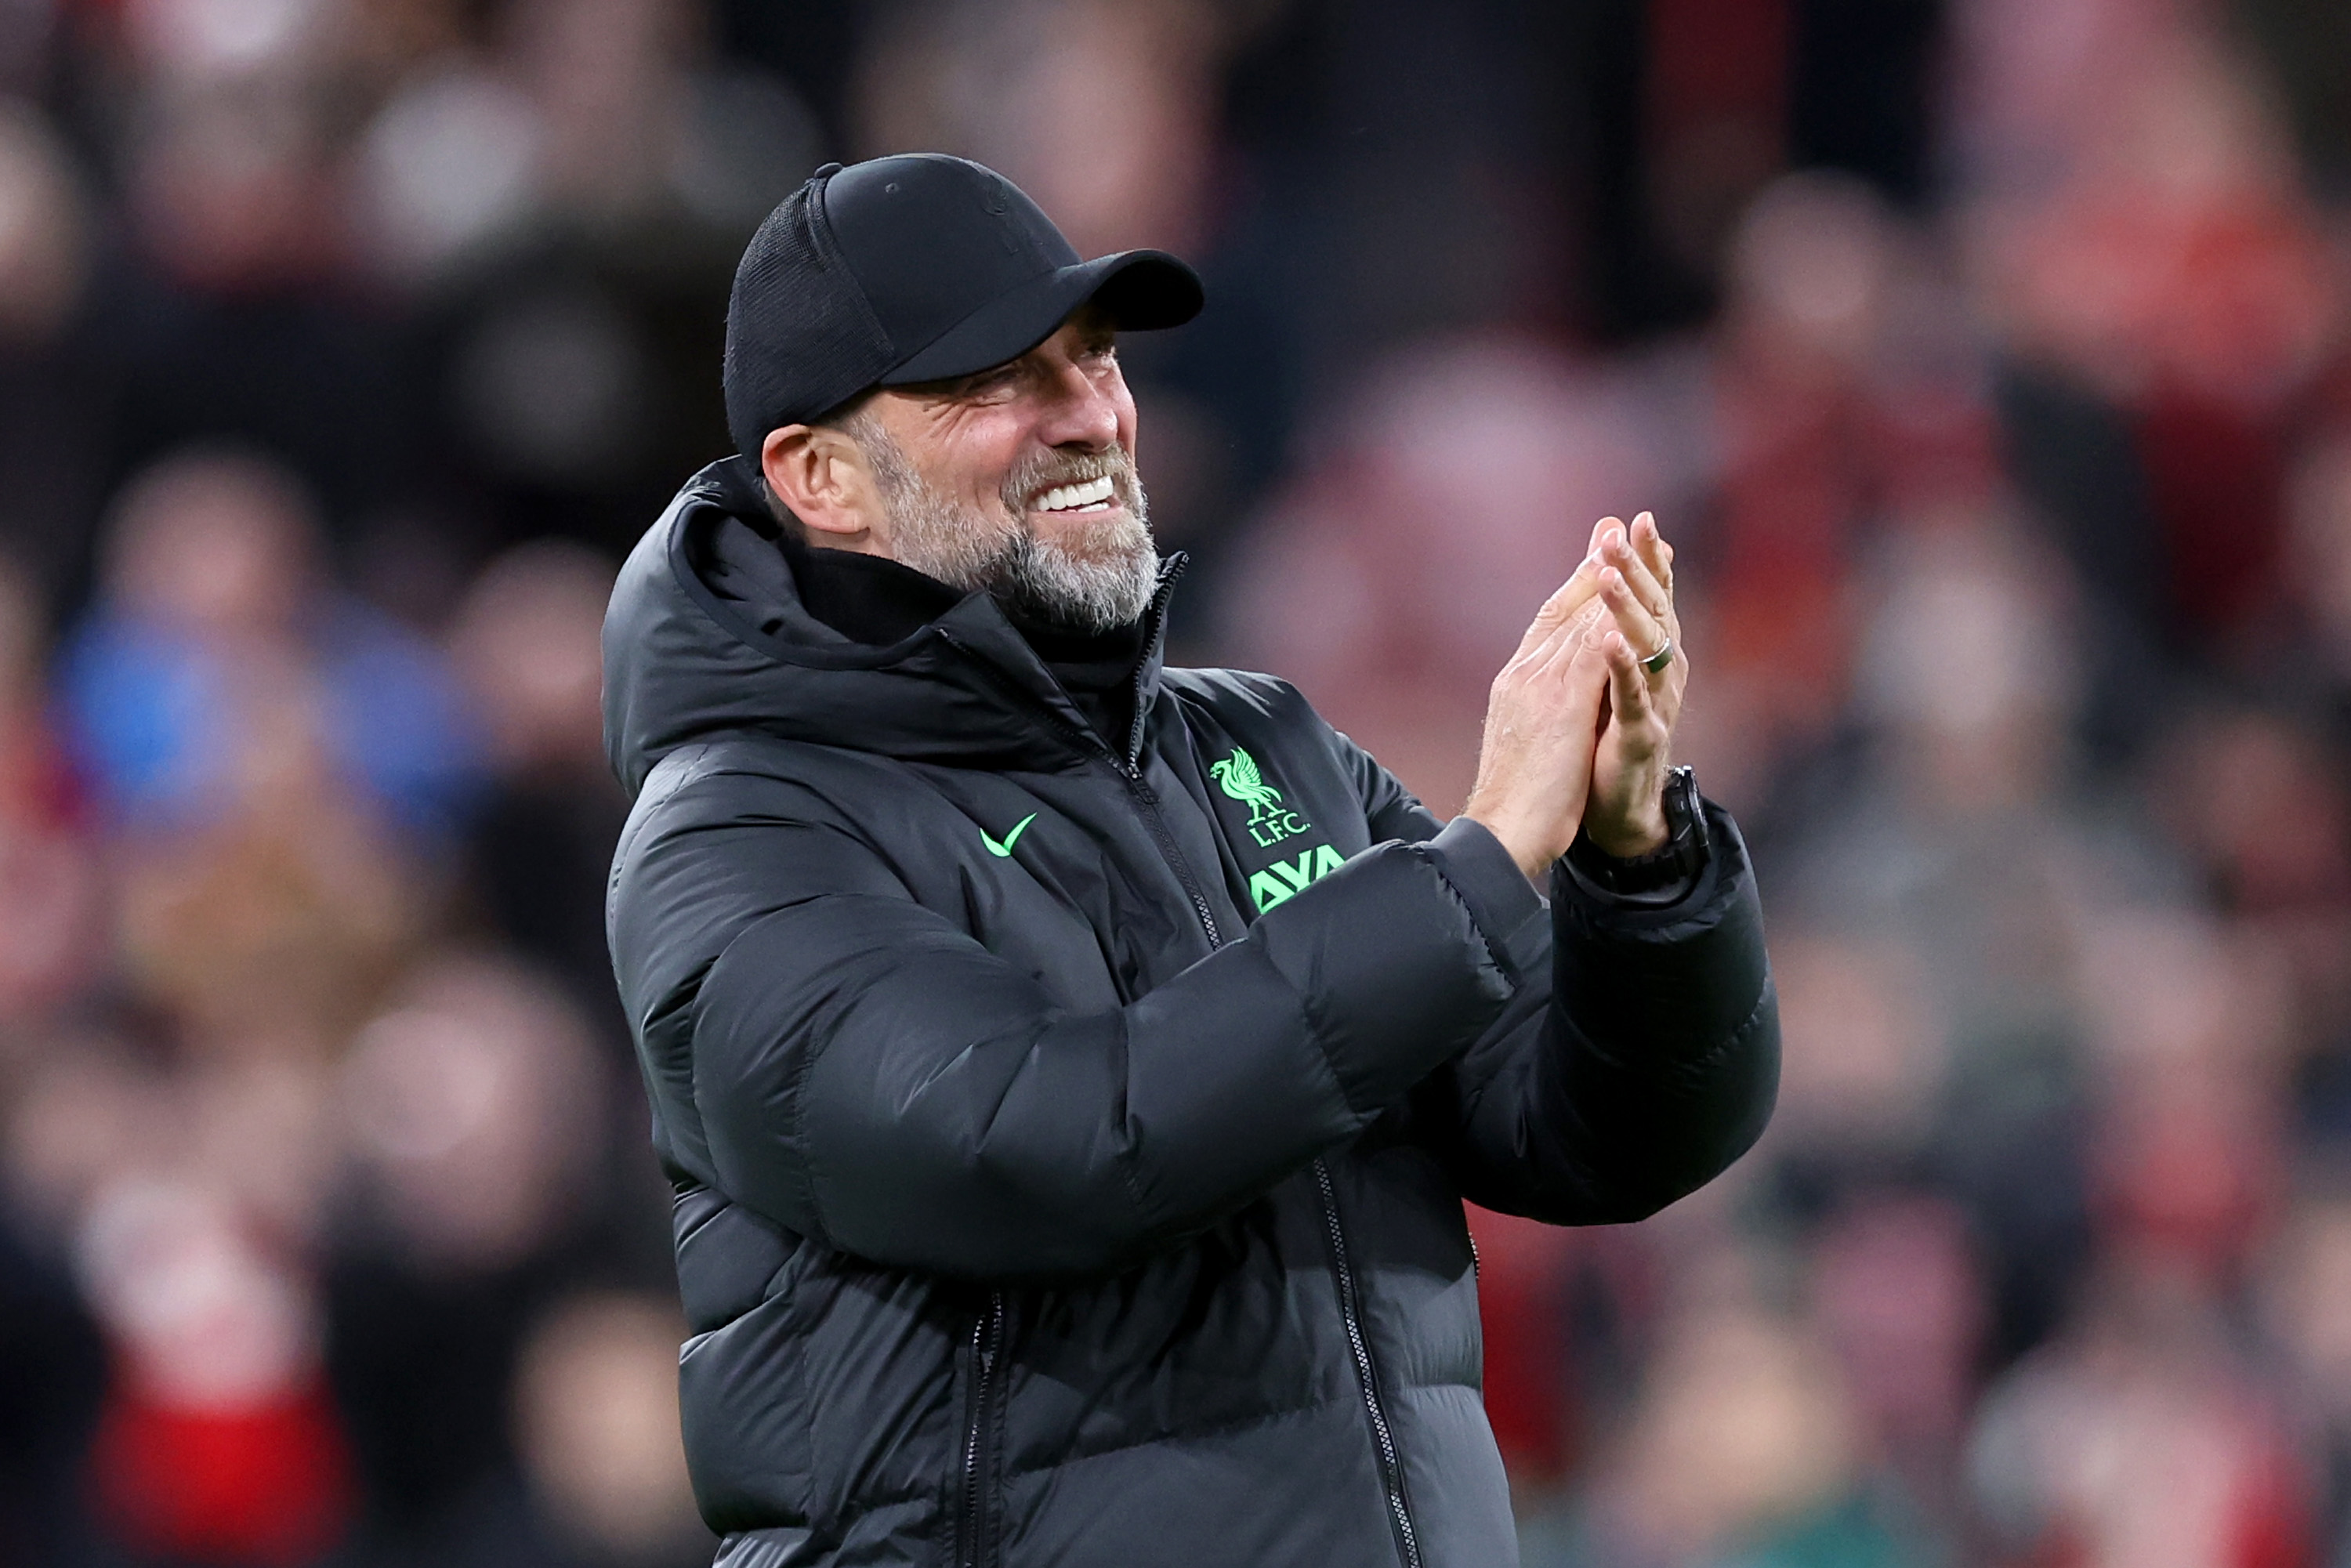 Contract signed: Liverpool confirm deal for up-and-coming talent who could be their next Quansah